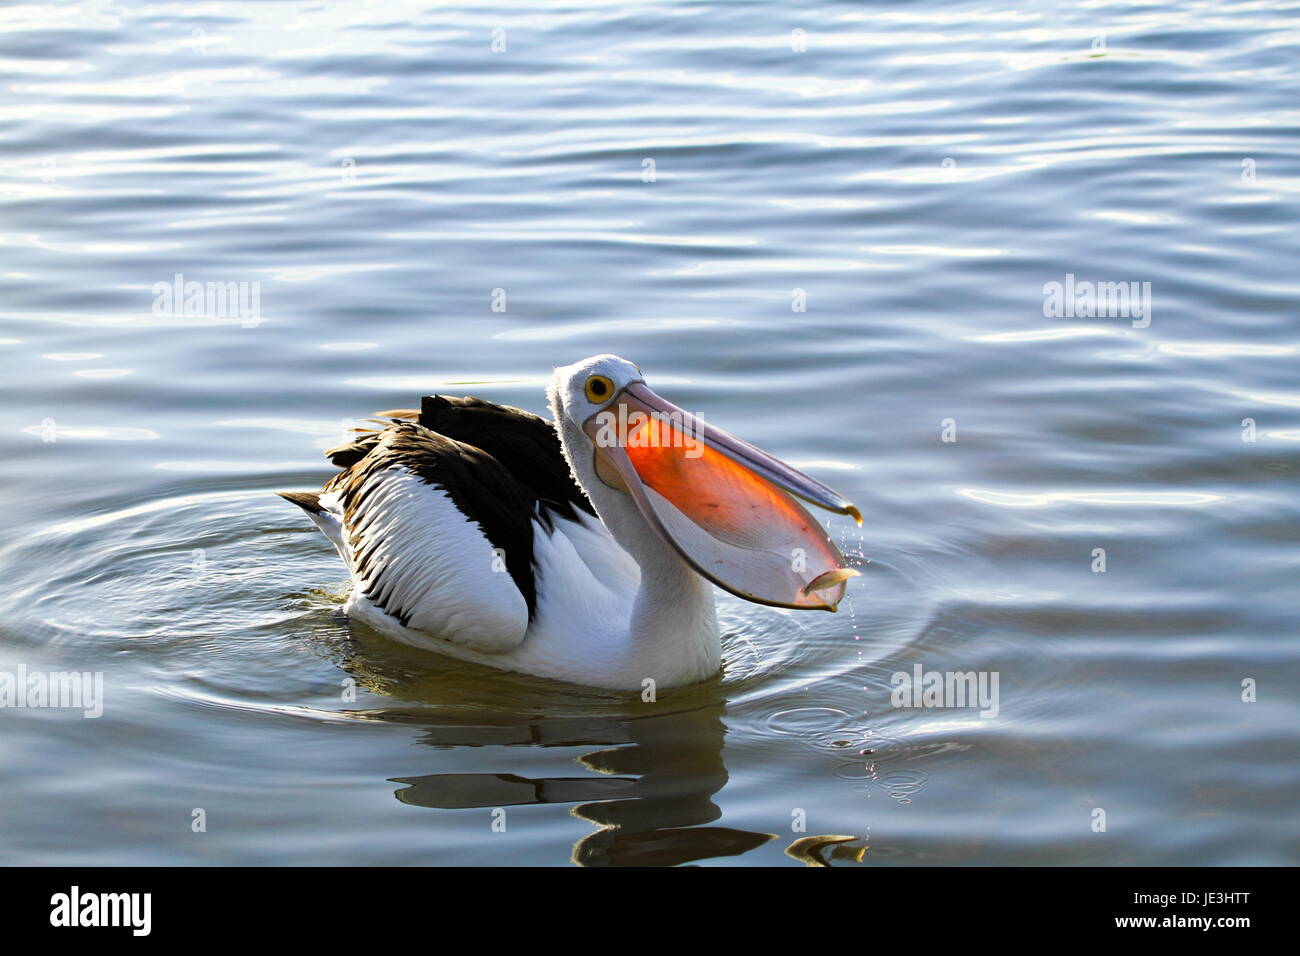 An Australian Pelican with its bill open as it swims in the Maroochy River. Stock Photo